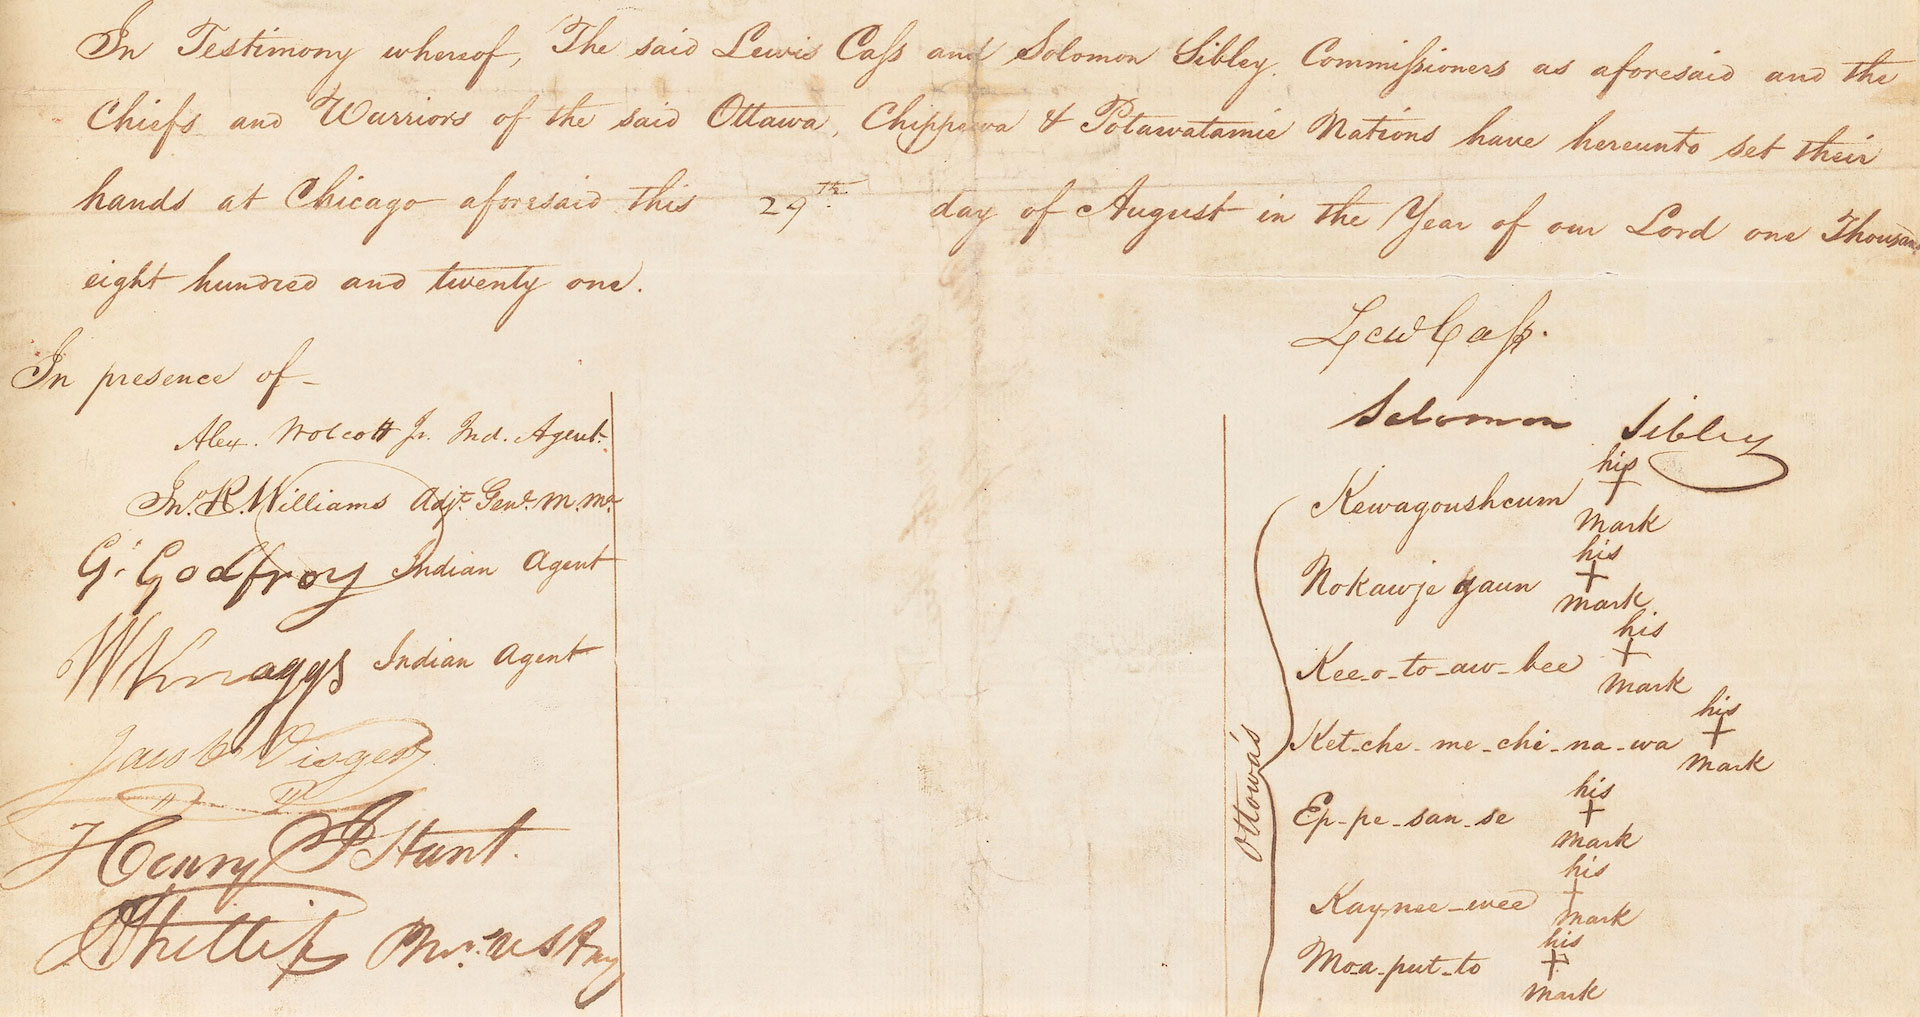 One of the signature pages from the 1821 Treaty of Chicago.